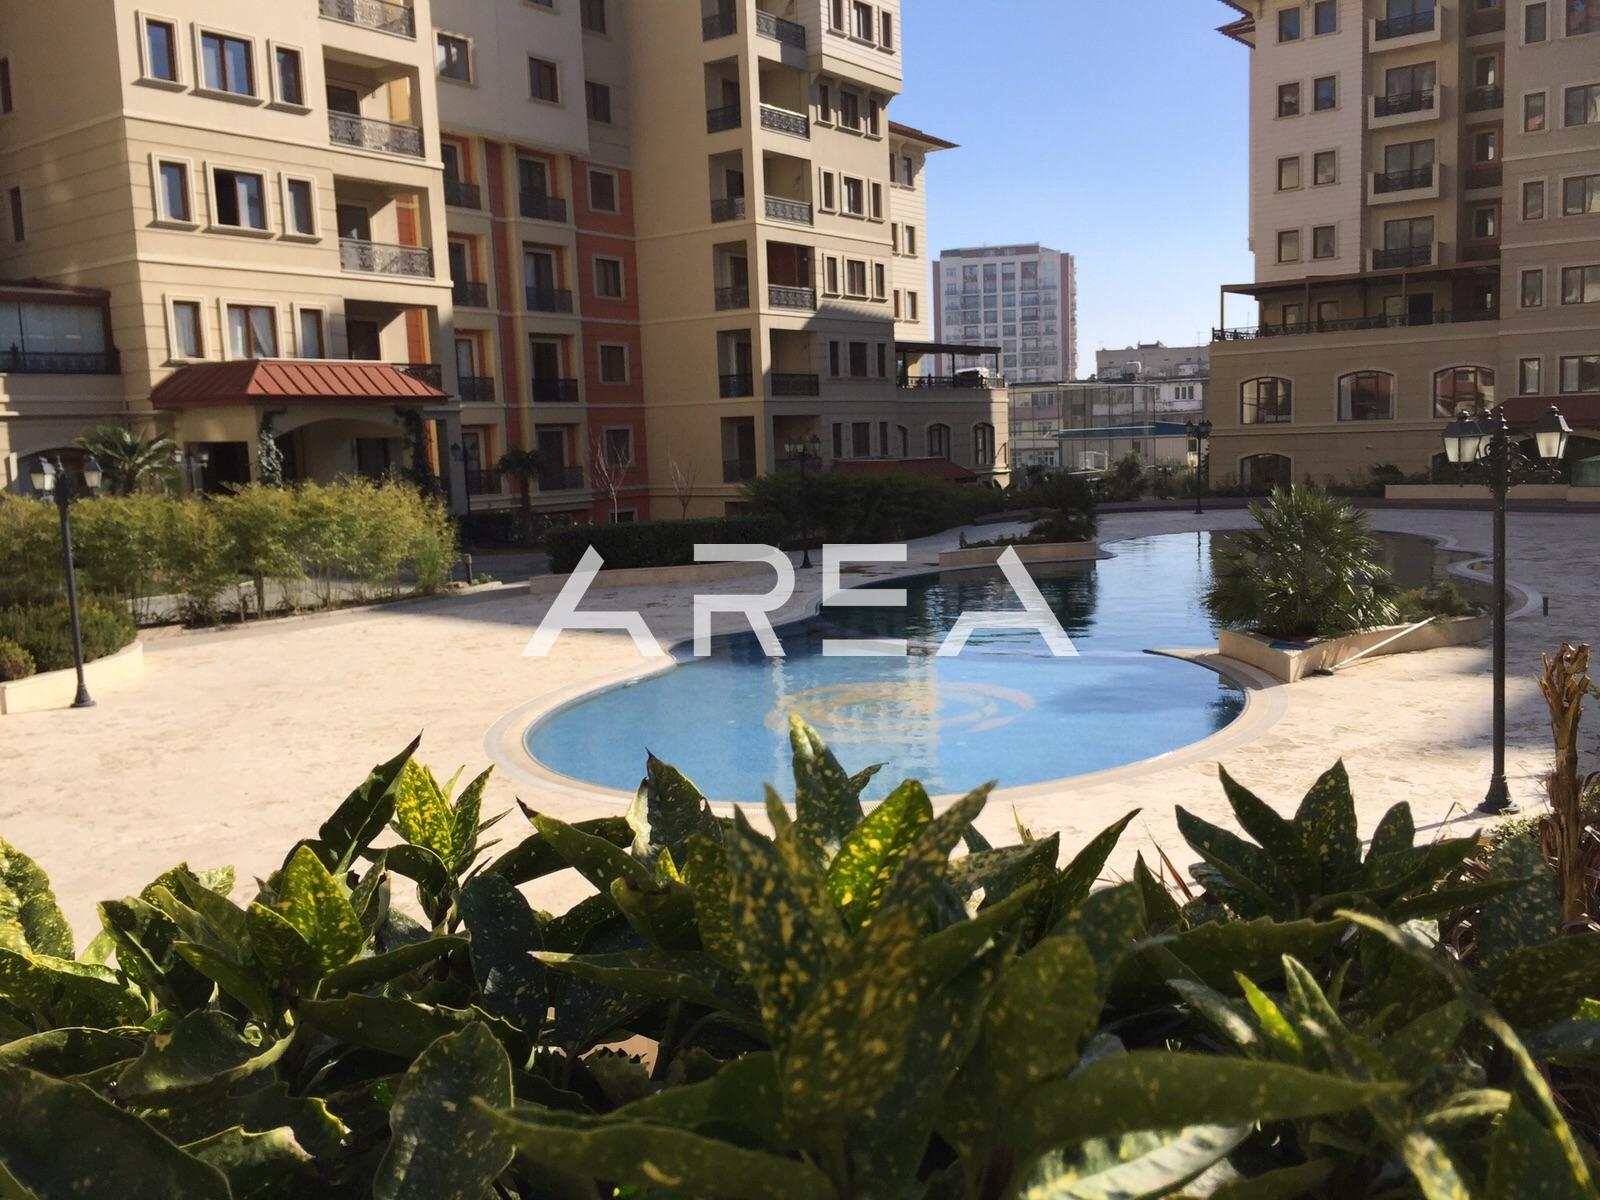  3-bedroom apartment is for sale in 